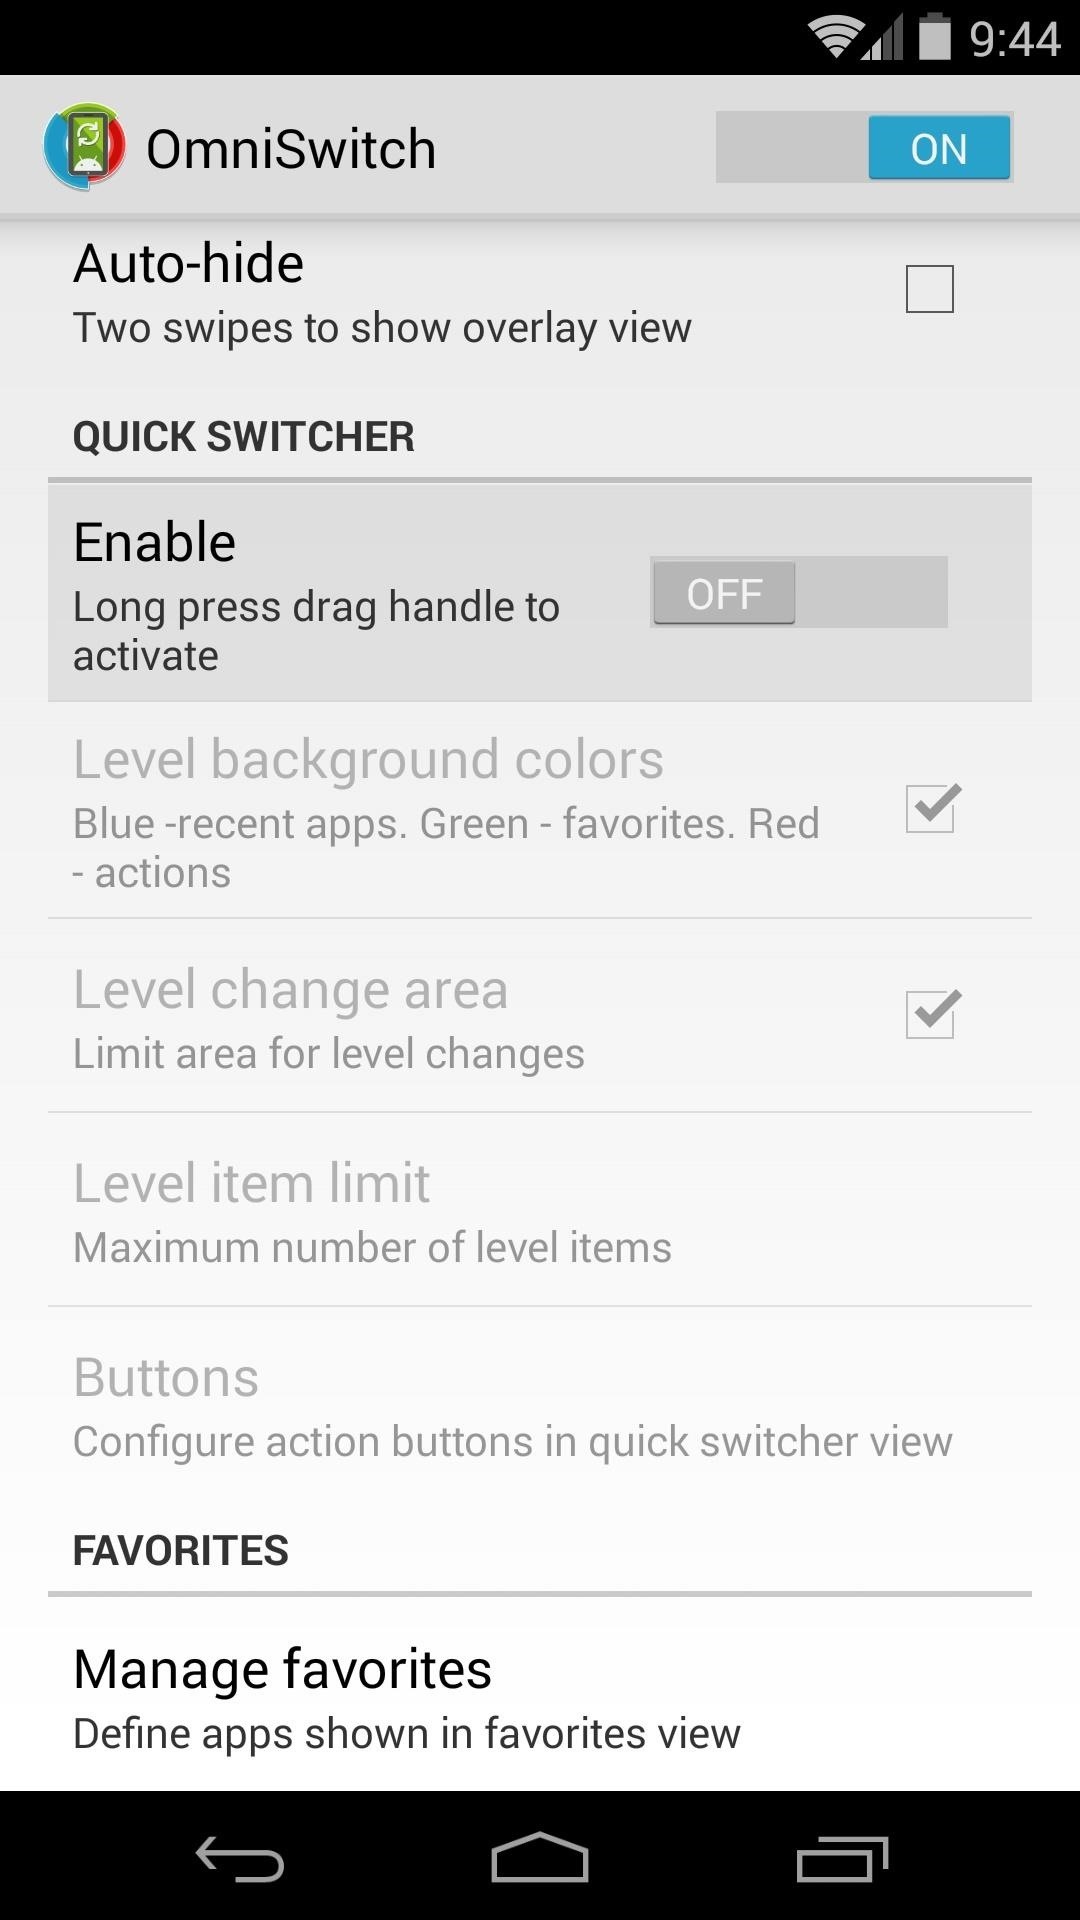 How to Install OmniSwitch for Streamlined Multitasking on Your Nexus 5